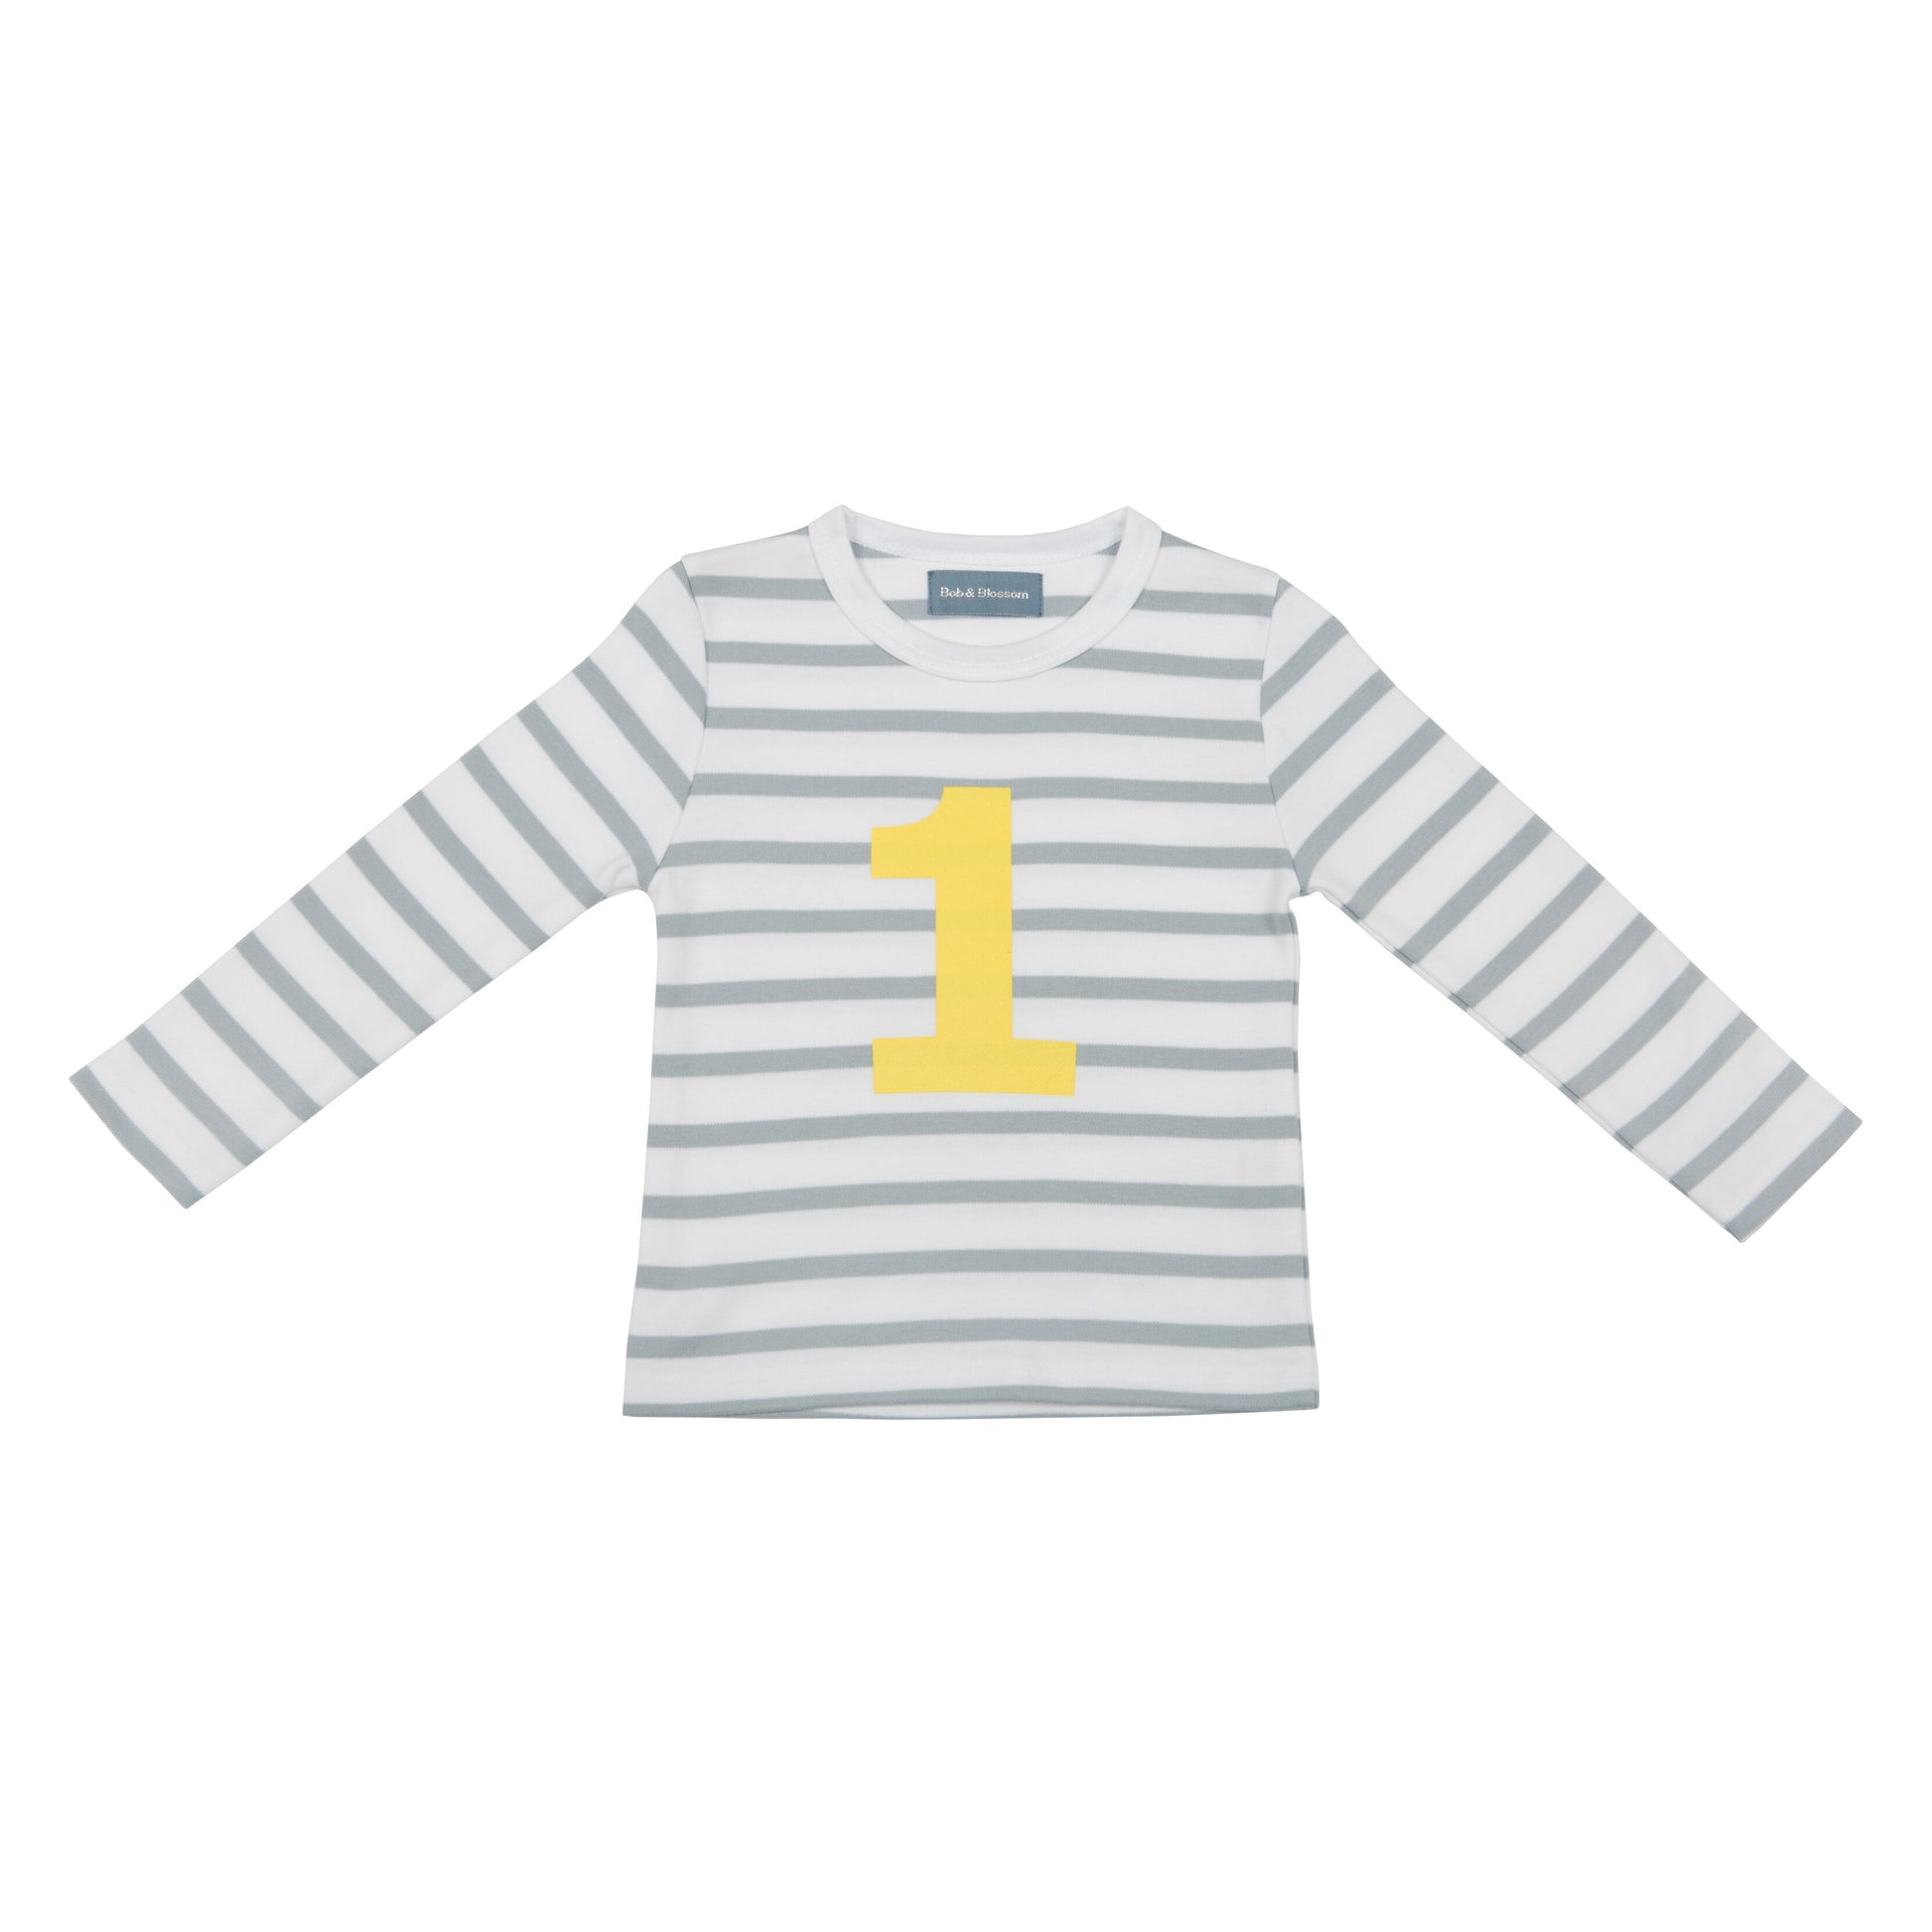 Bob & Blossom grey and white striped long sleeved t shirt with yellow number 1